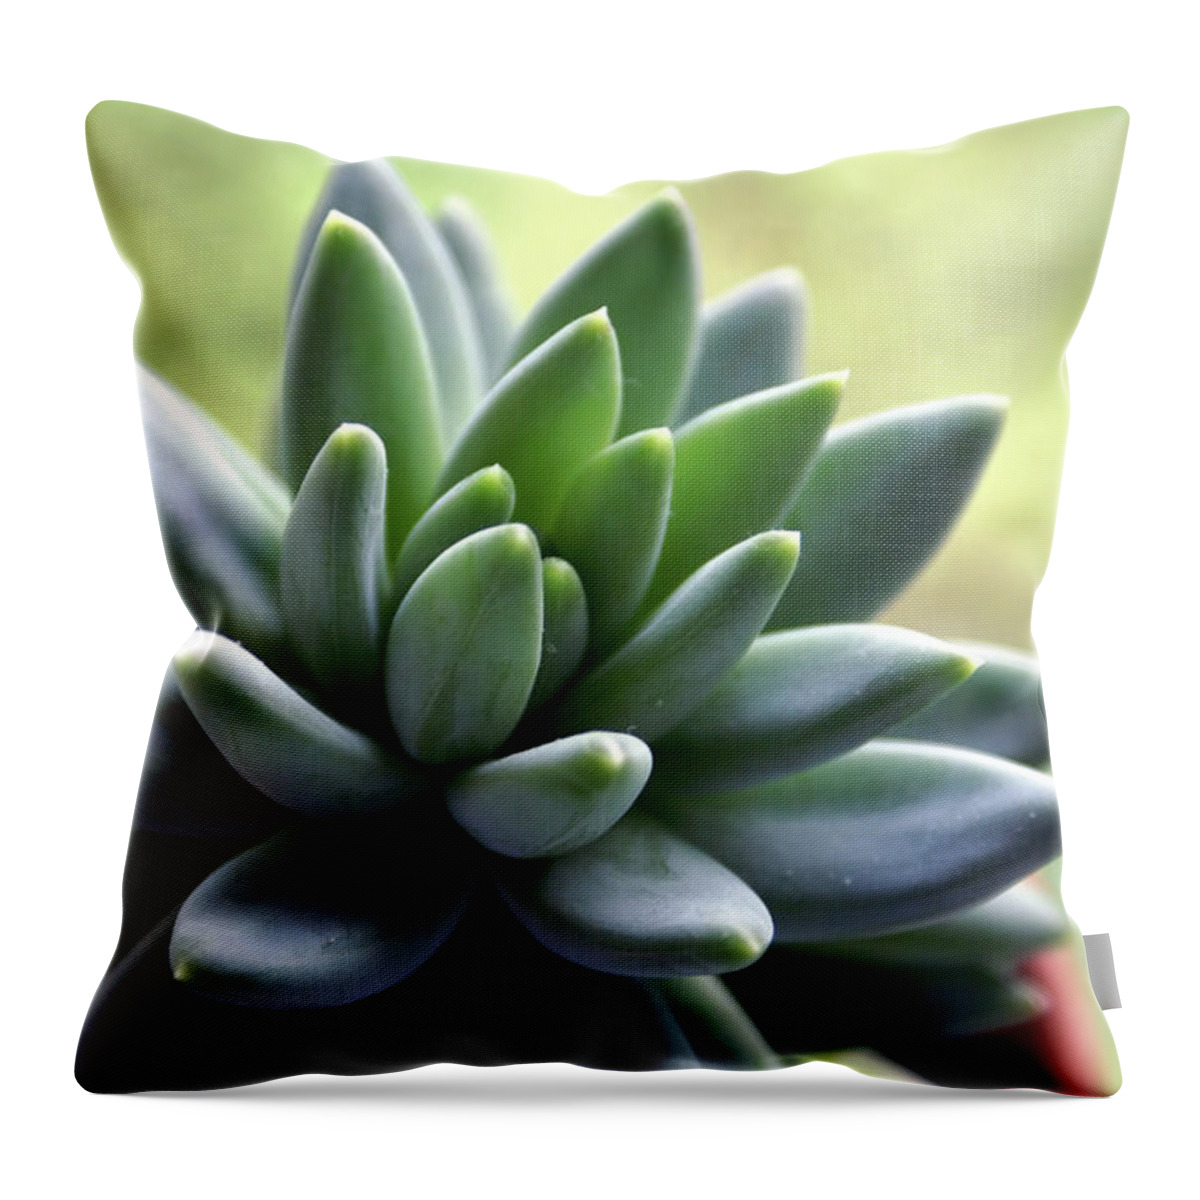 Agave Throw Pillow featuring the photograph In Focus View Of Green Houseplant With by Dorin s